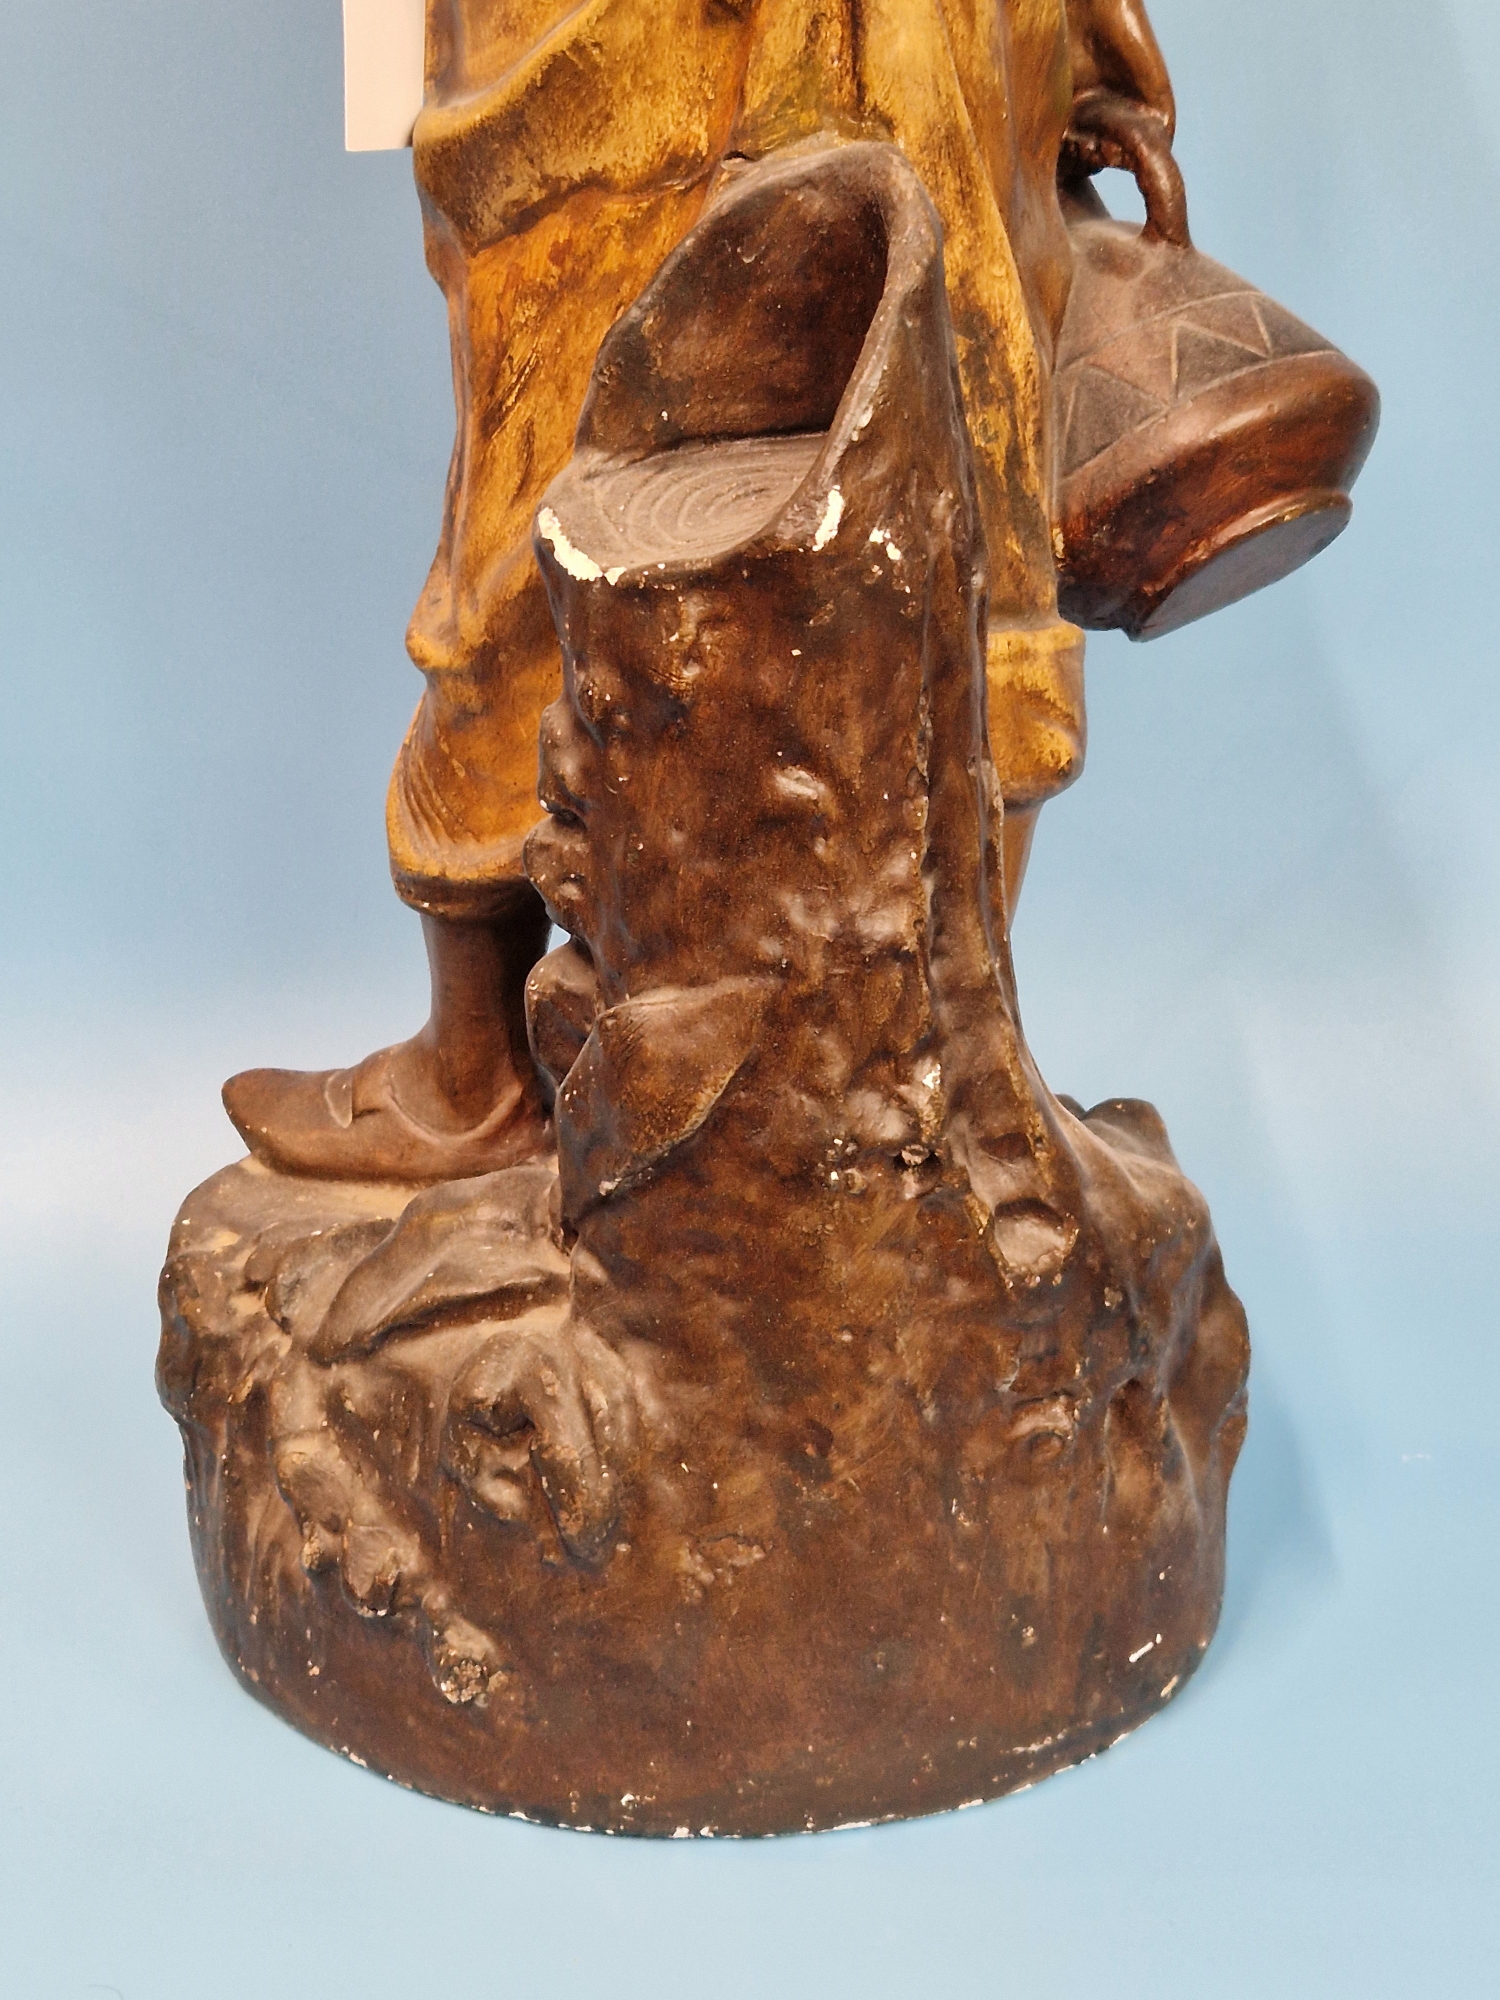 A PAINTED PLASTER FIGURE OF A NORTH AFRICAN MAN STANDING HOLDING A WATER PITCHER. H 67cms. - Image 6 of 8